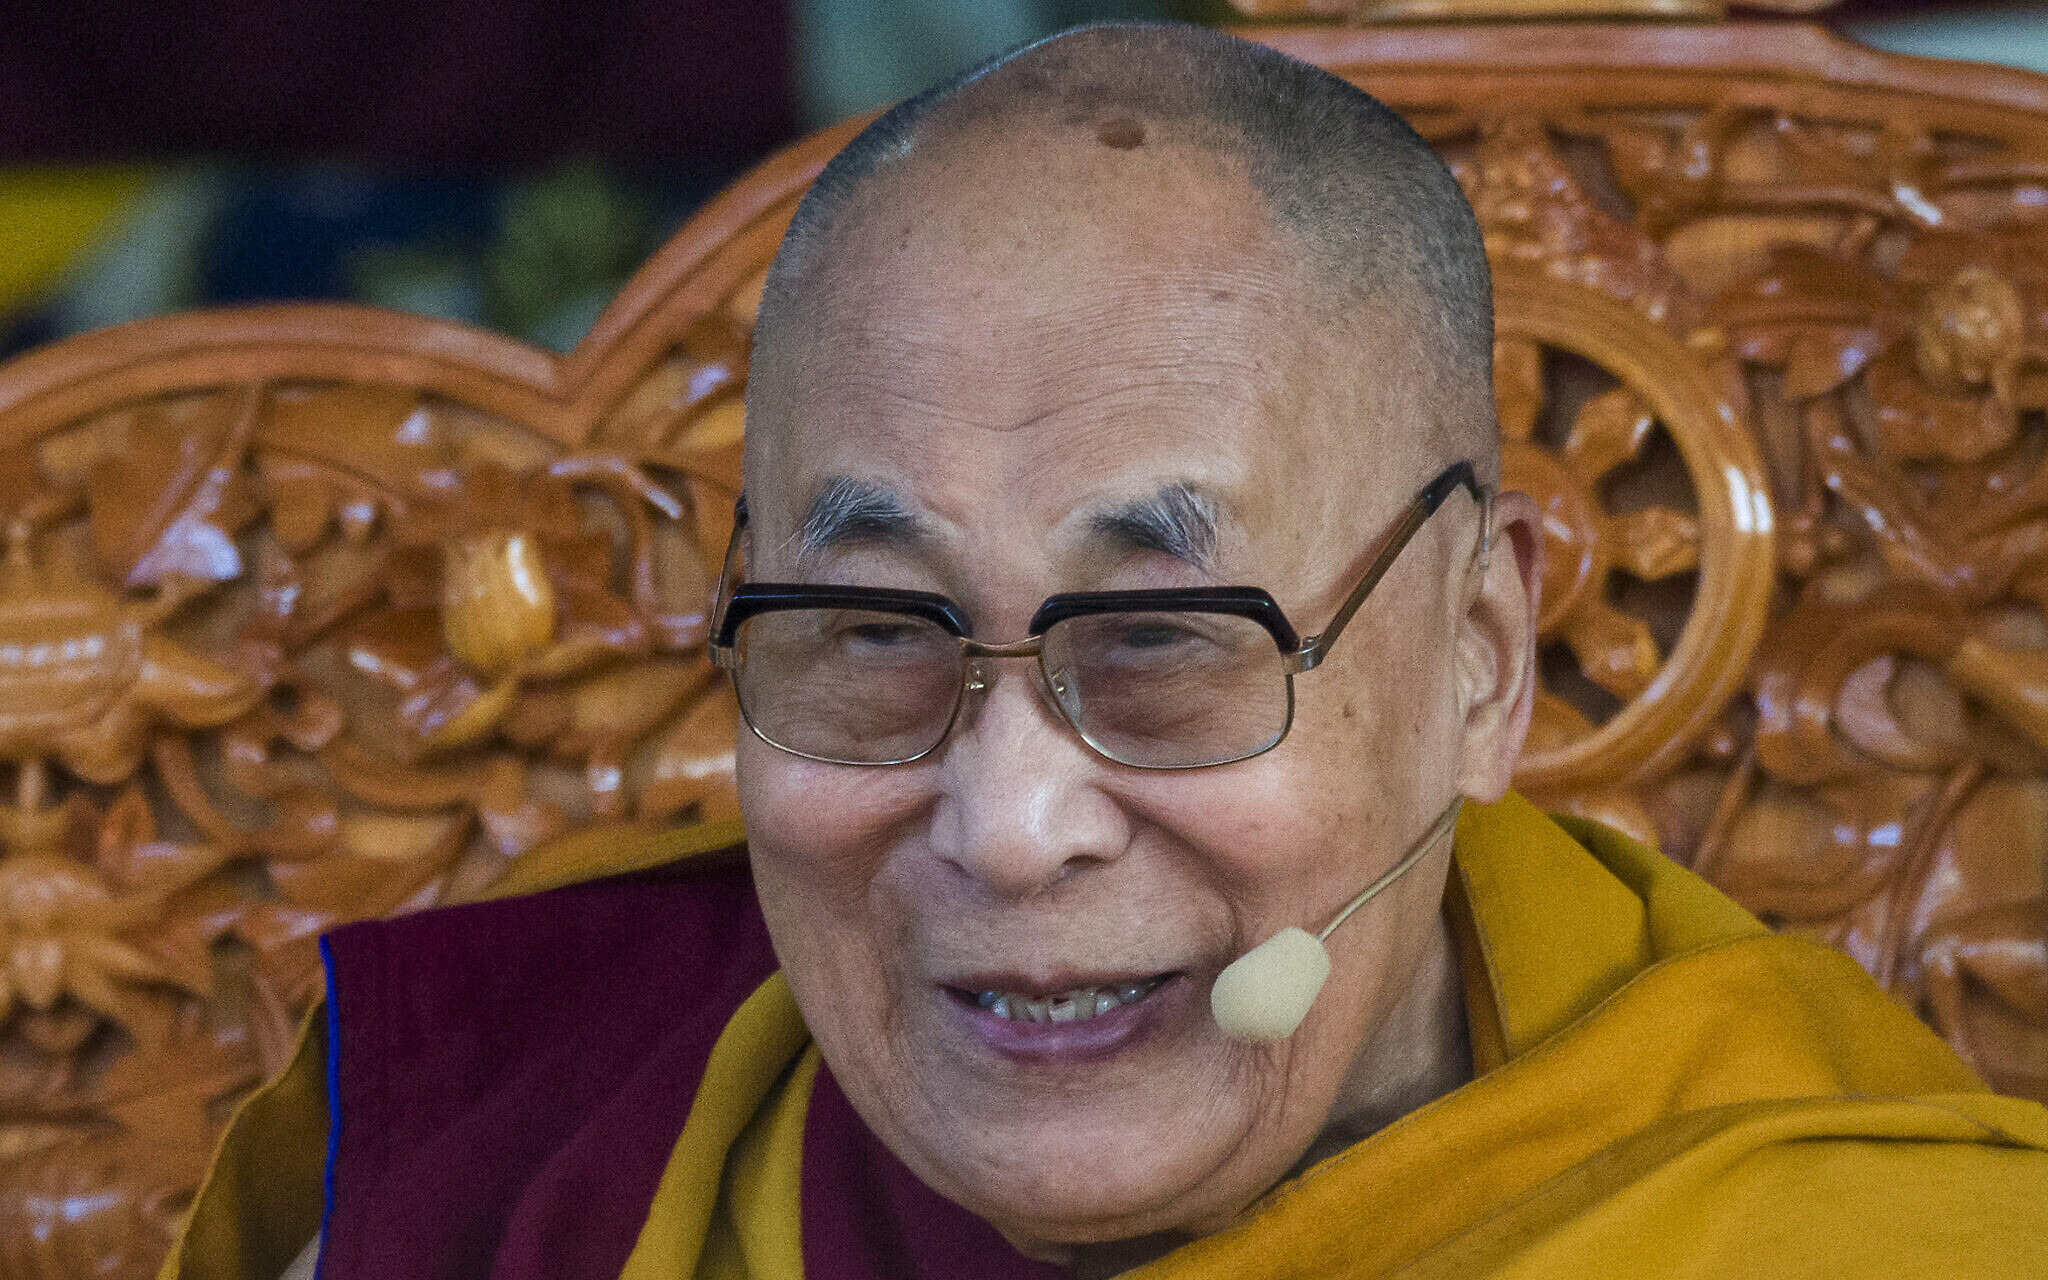 Dalai Lama Under fire After Video Showing Him Kissing a Young Boy & Telling Him to "Suck His Tongue" Went Viral